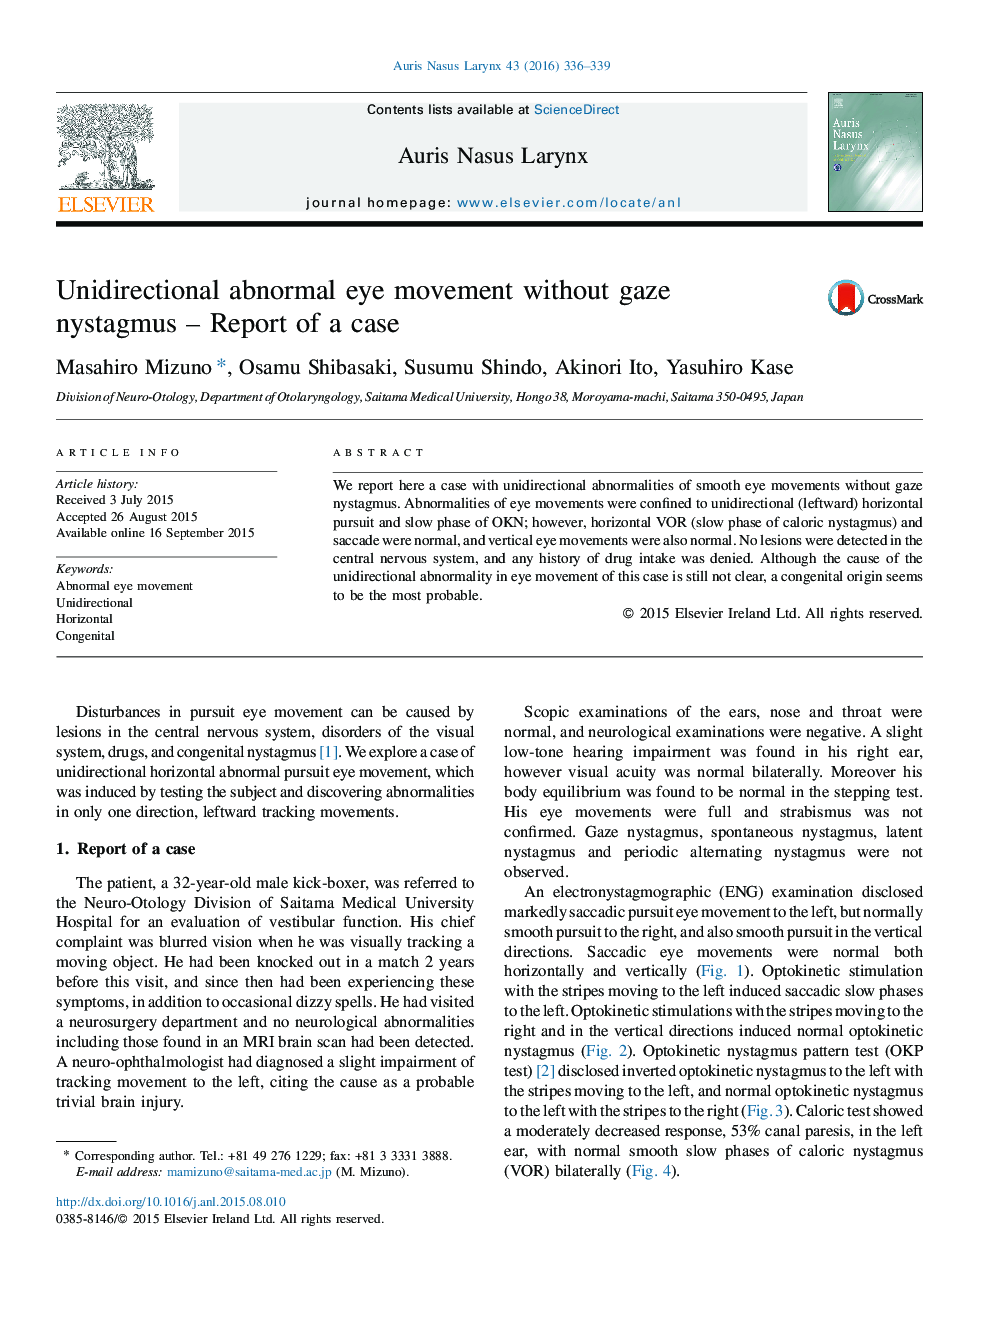 Unidirectional abnormal eye movement without gaze nystagmus - Report of a case